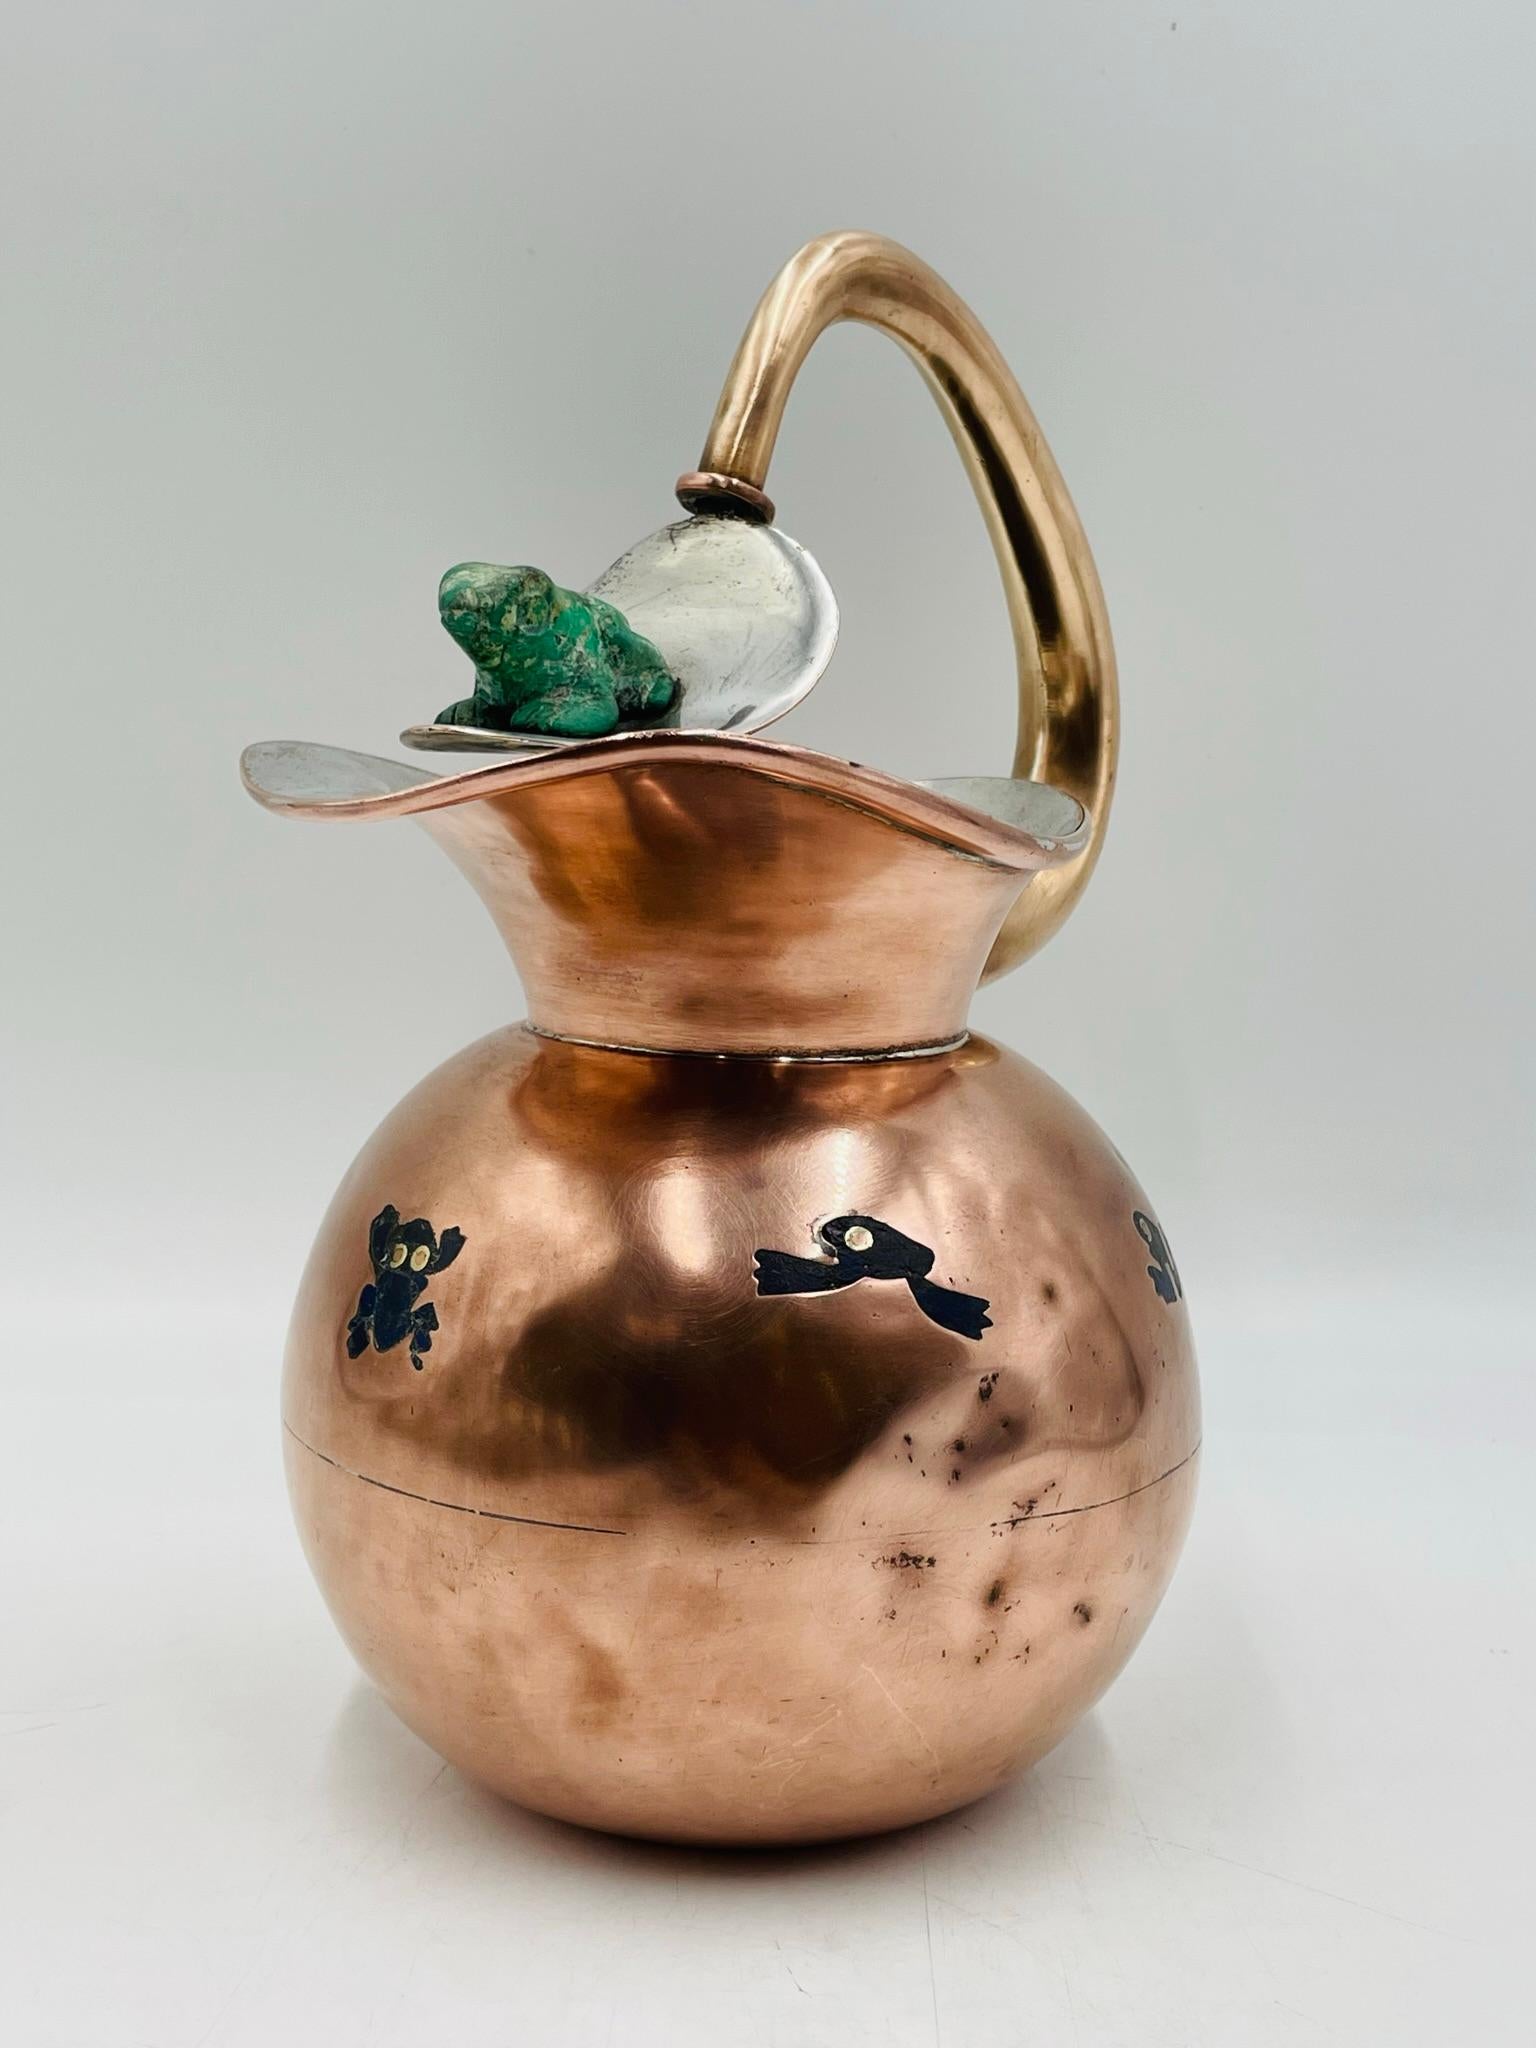 Hand-Crafted Copper, Silver & Stone Pitcher by Los Castillo, Mexico 1960's, Signed. For Sale